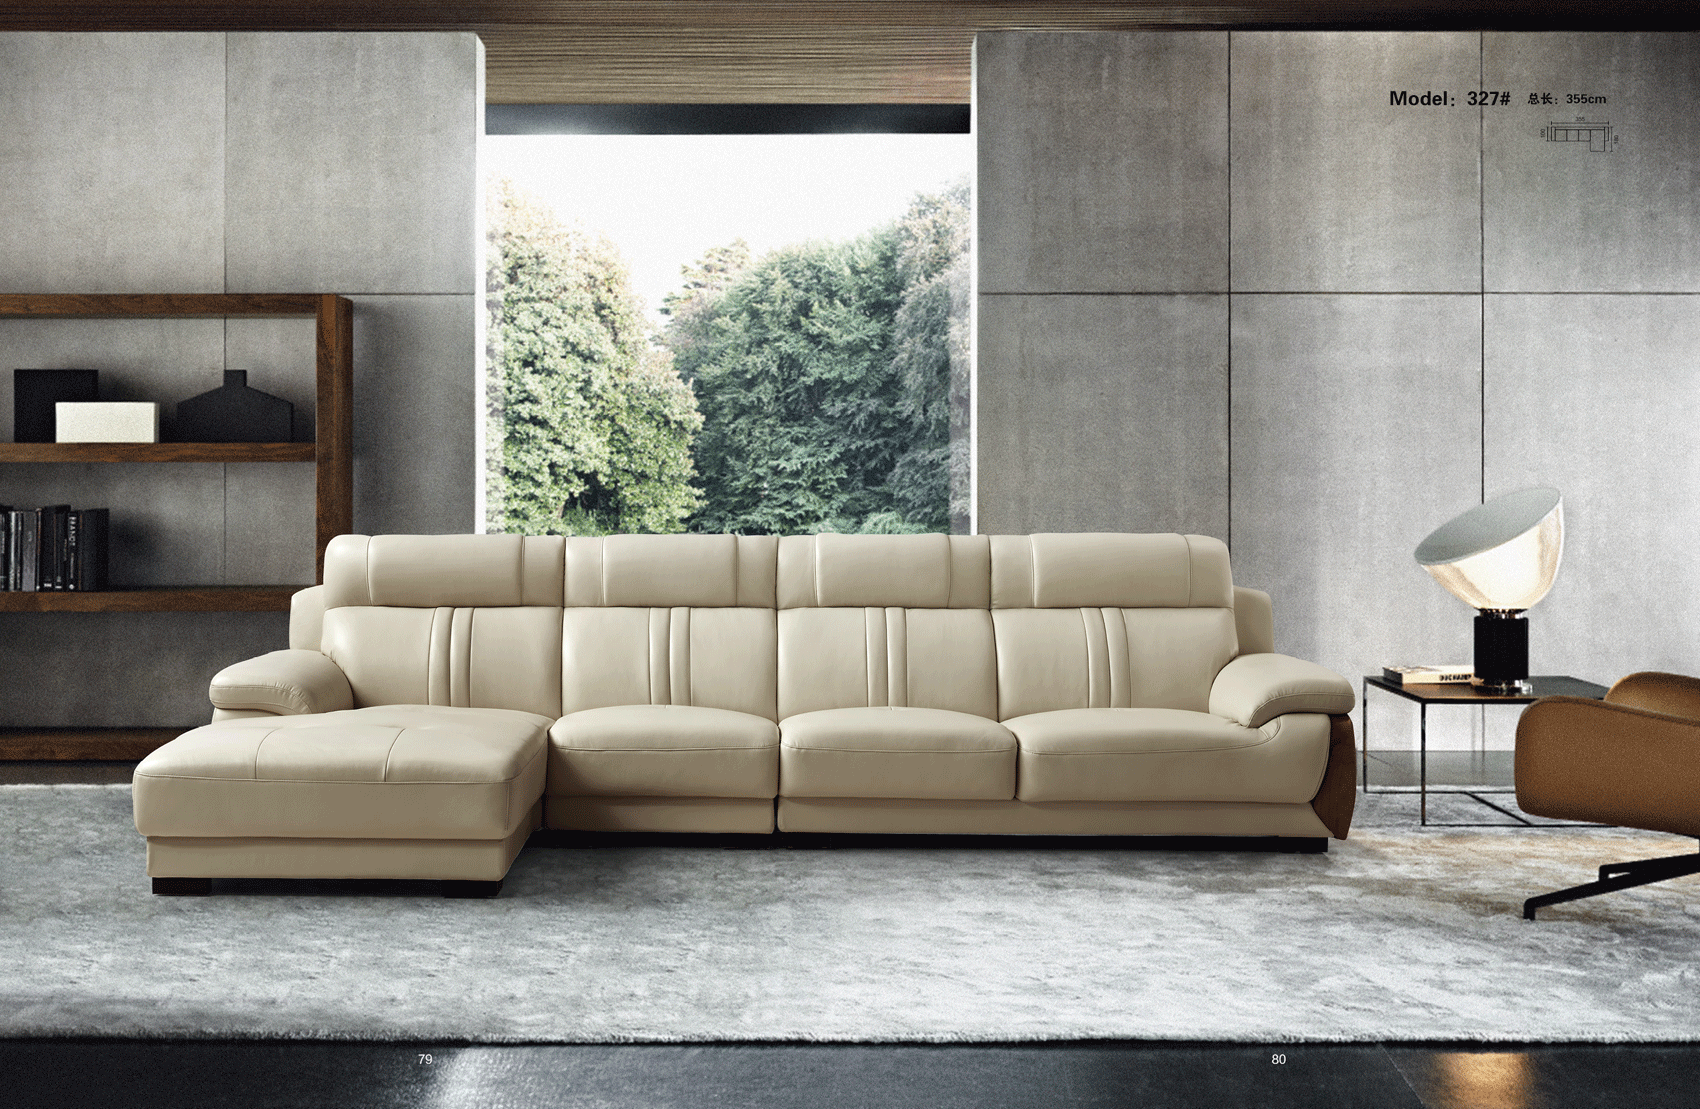 Living Room Furniture Reclining and Sliding Seats Sets 327 Sectional